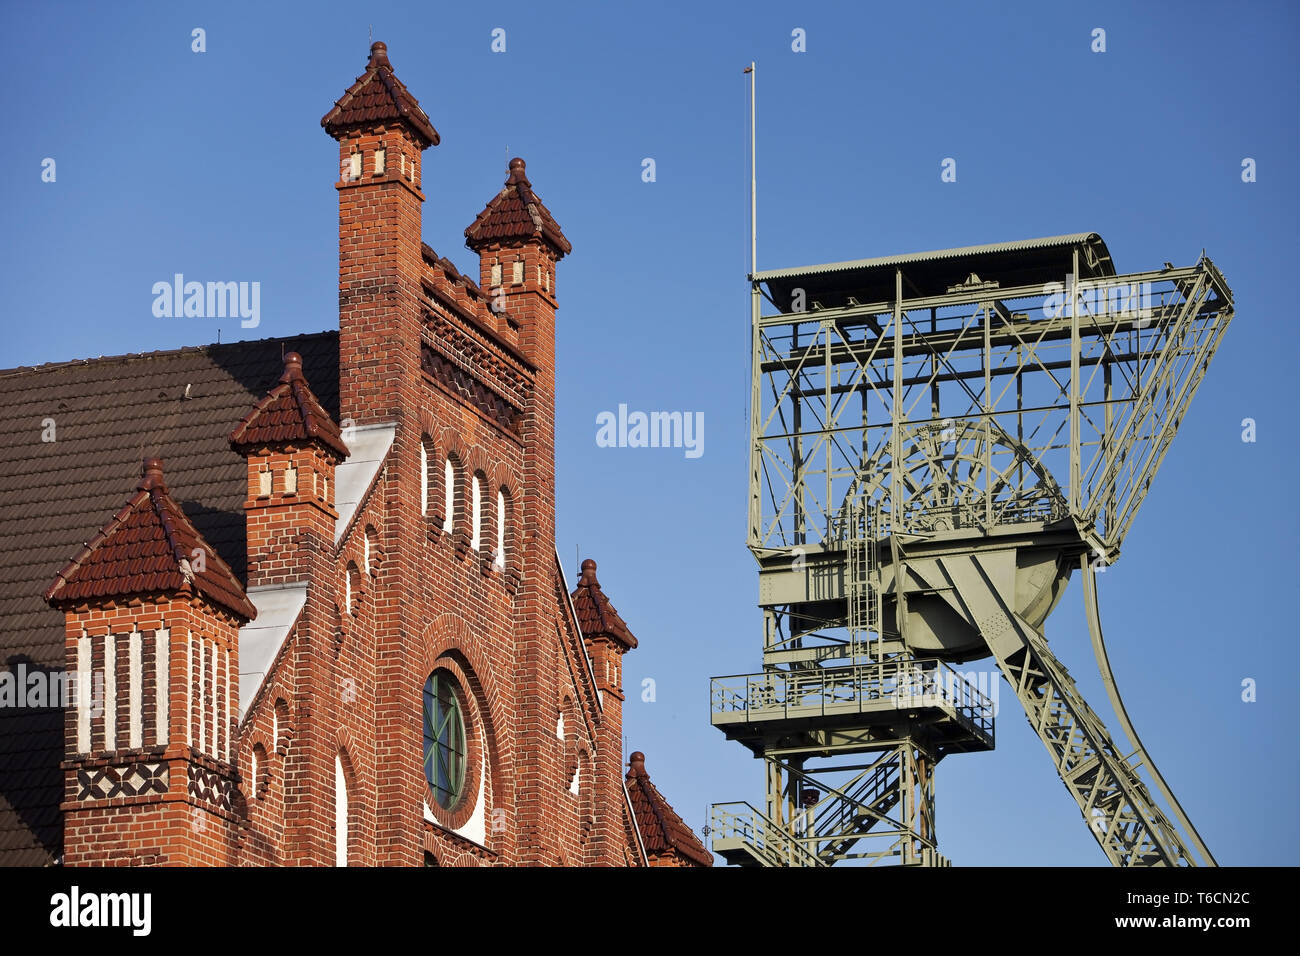 Zollern II/IV Colliery, LWL Industrial Museum, Dortmund, Ruhr Area, Germany, Europe Stock Photo